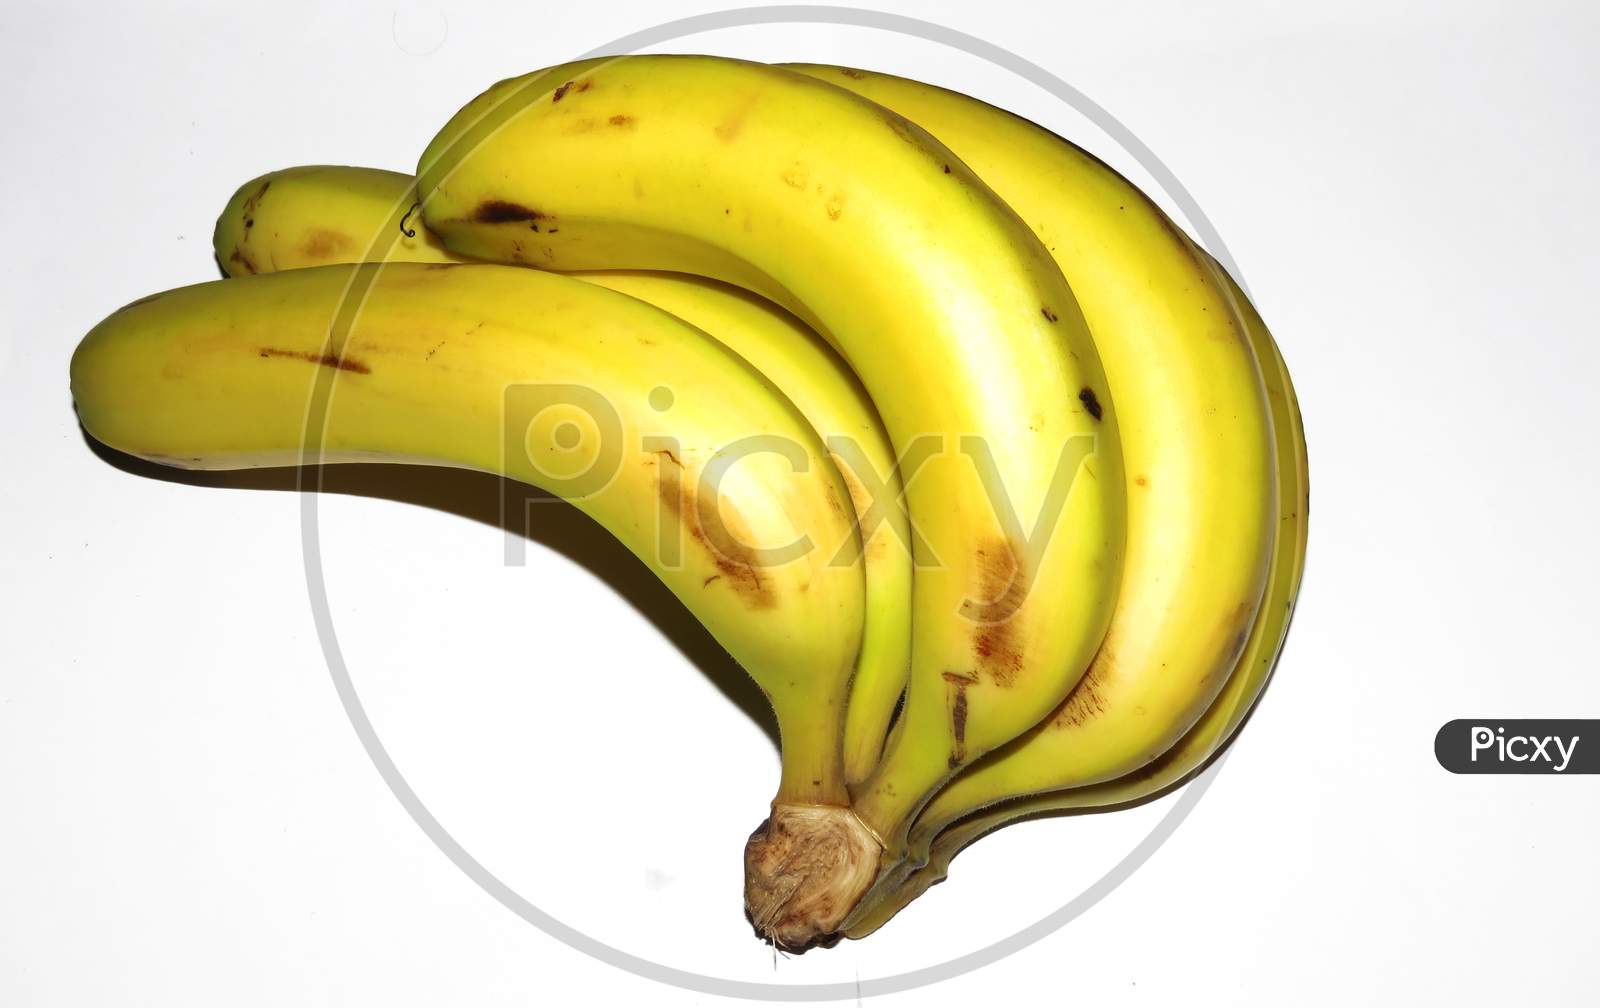 Bunch of Yellow bananas isolated on white background,A banana is an elongated, edible fruit.